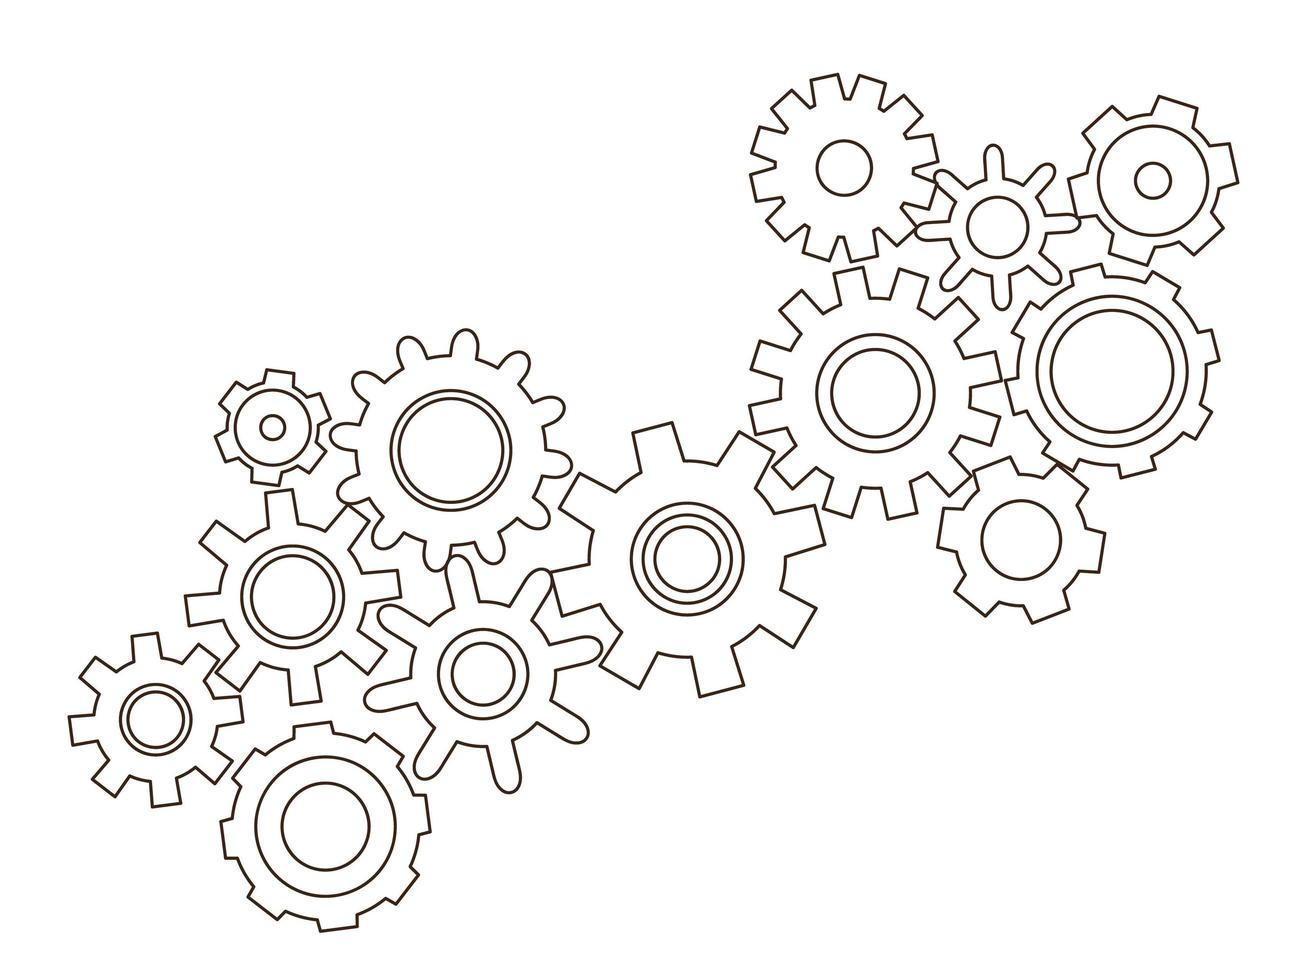 Gears vector set in hand drawn style. Goal, Planning, idea concept doodle illustration. Sketch gear infographic elements.